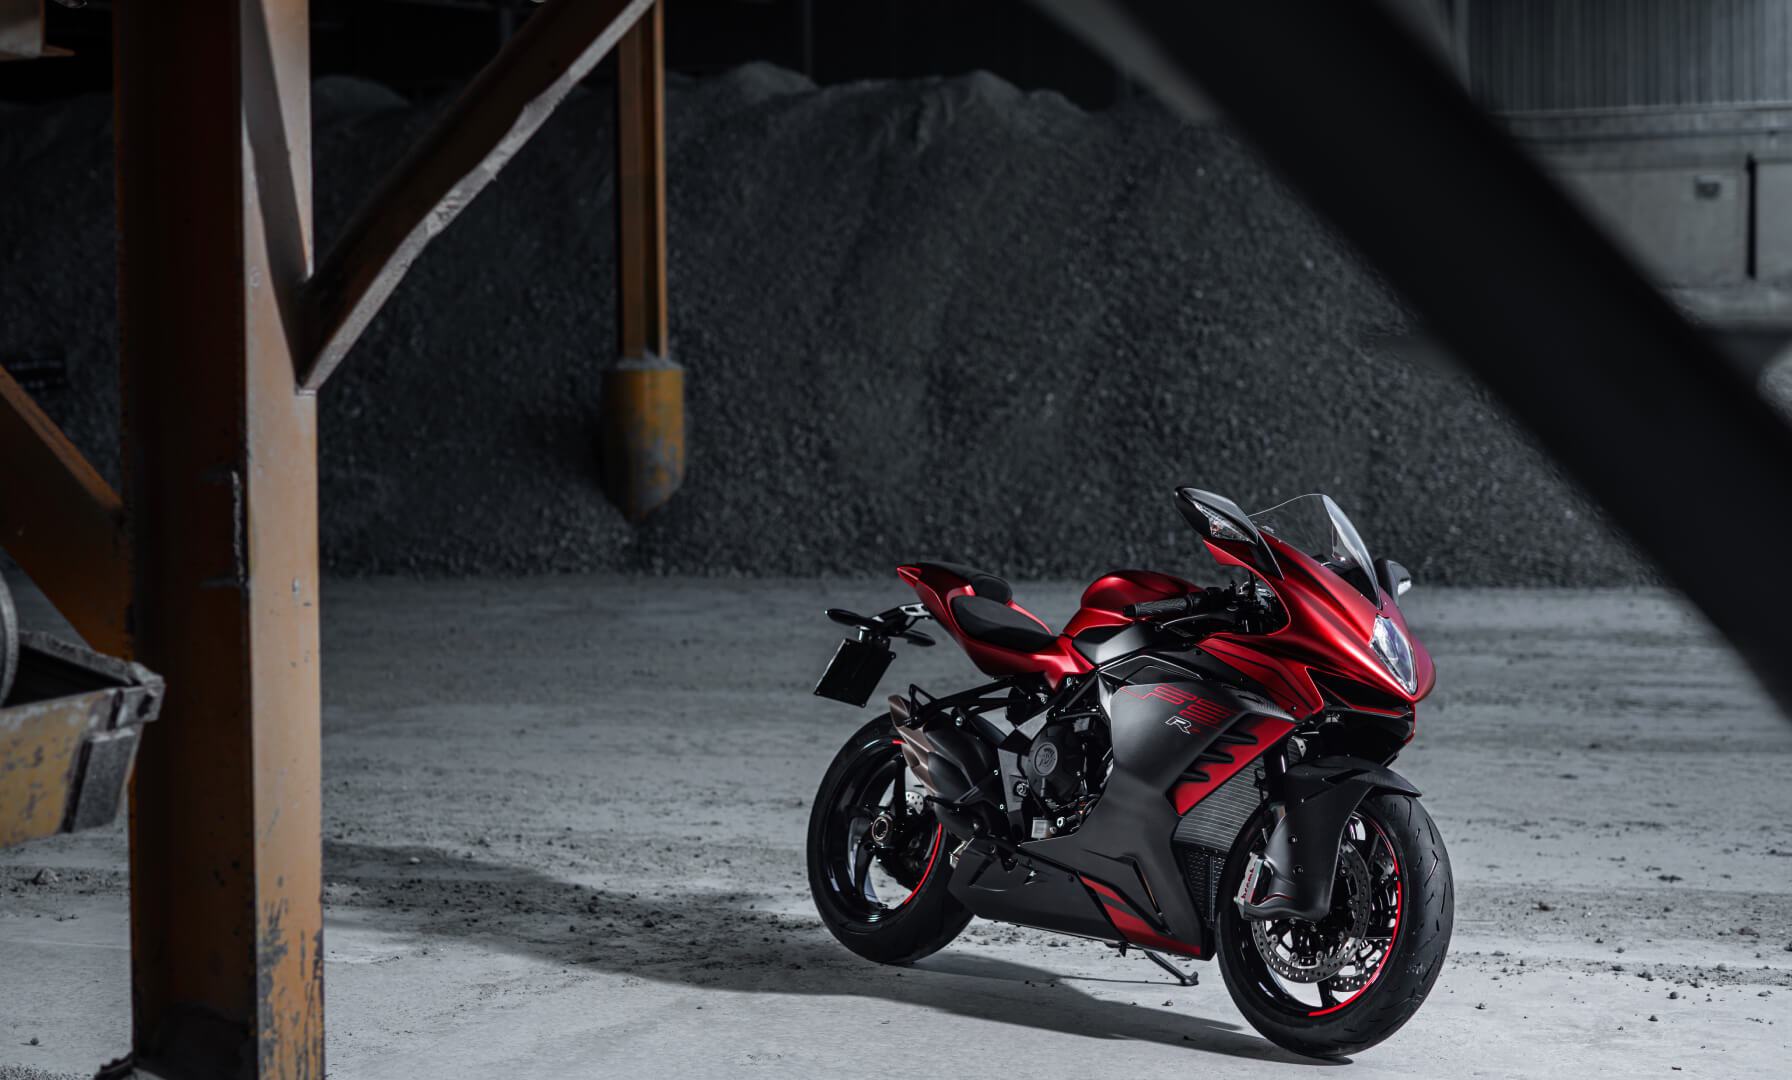 2022 MV Agusta F3 RR parked in empty lot at night